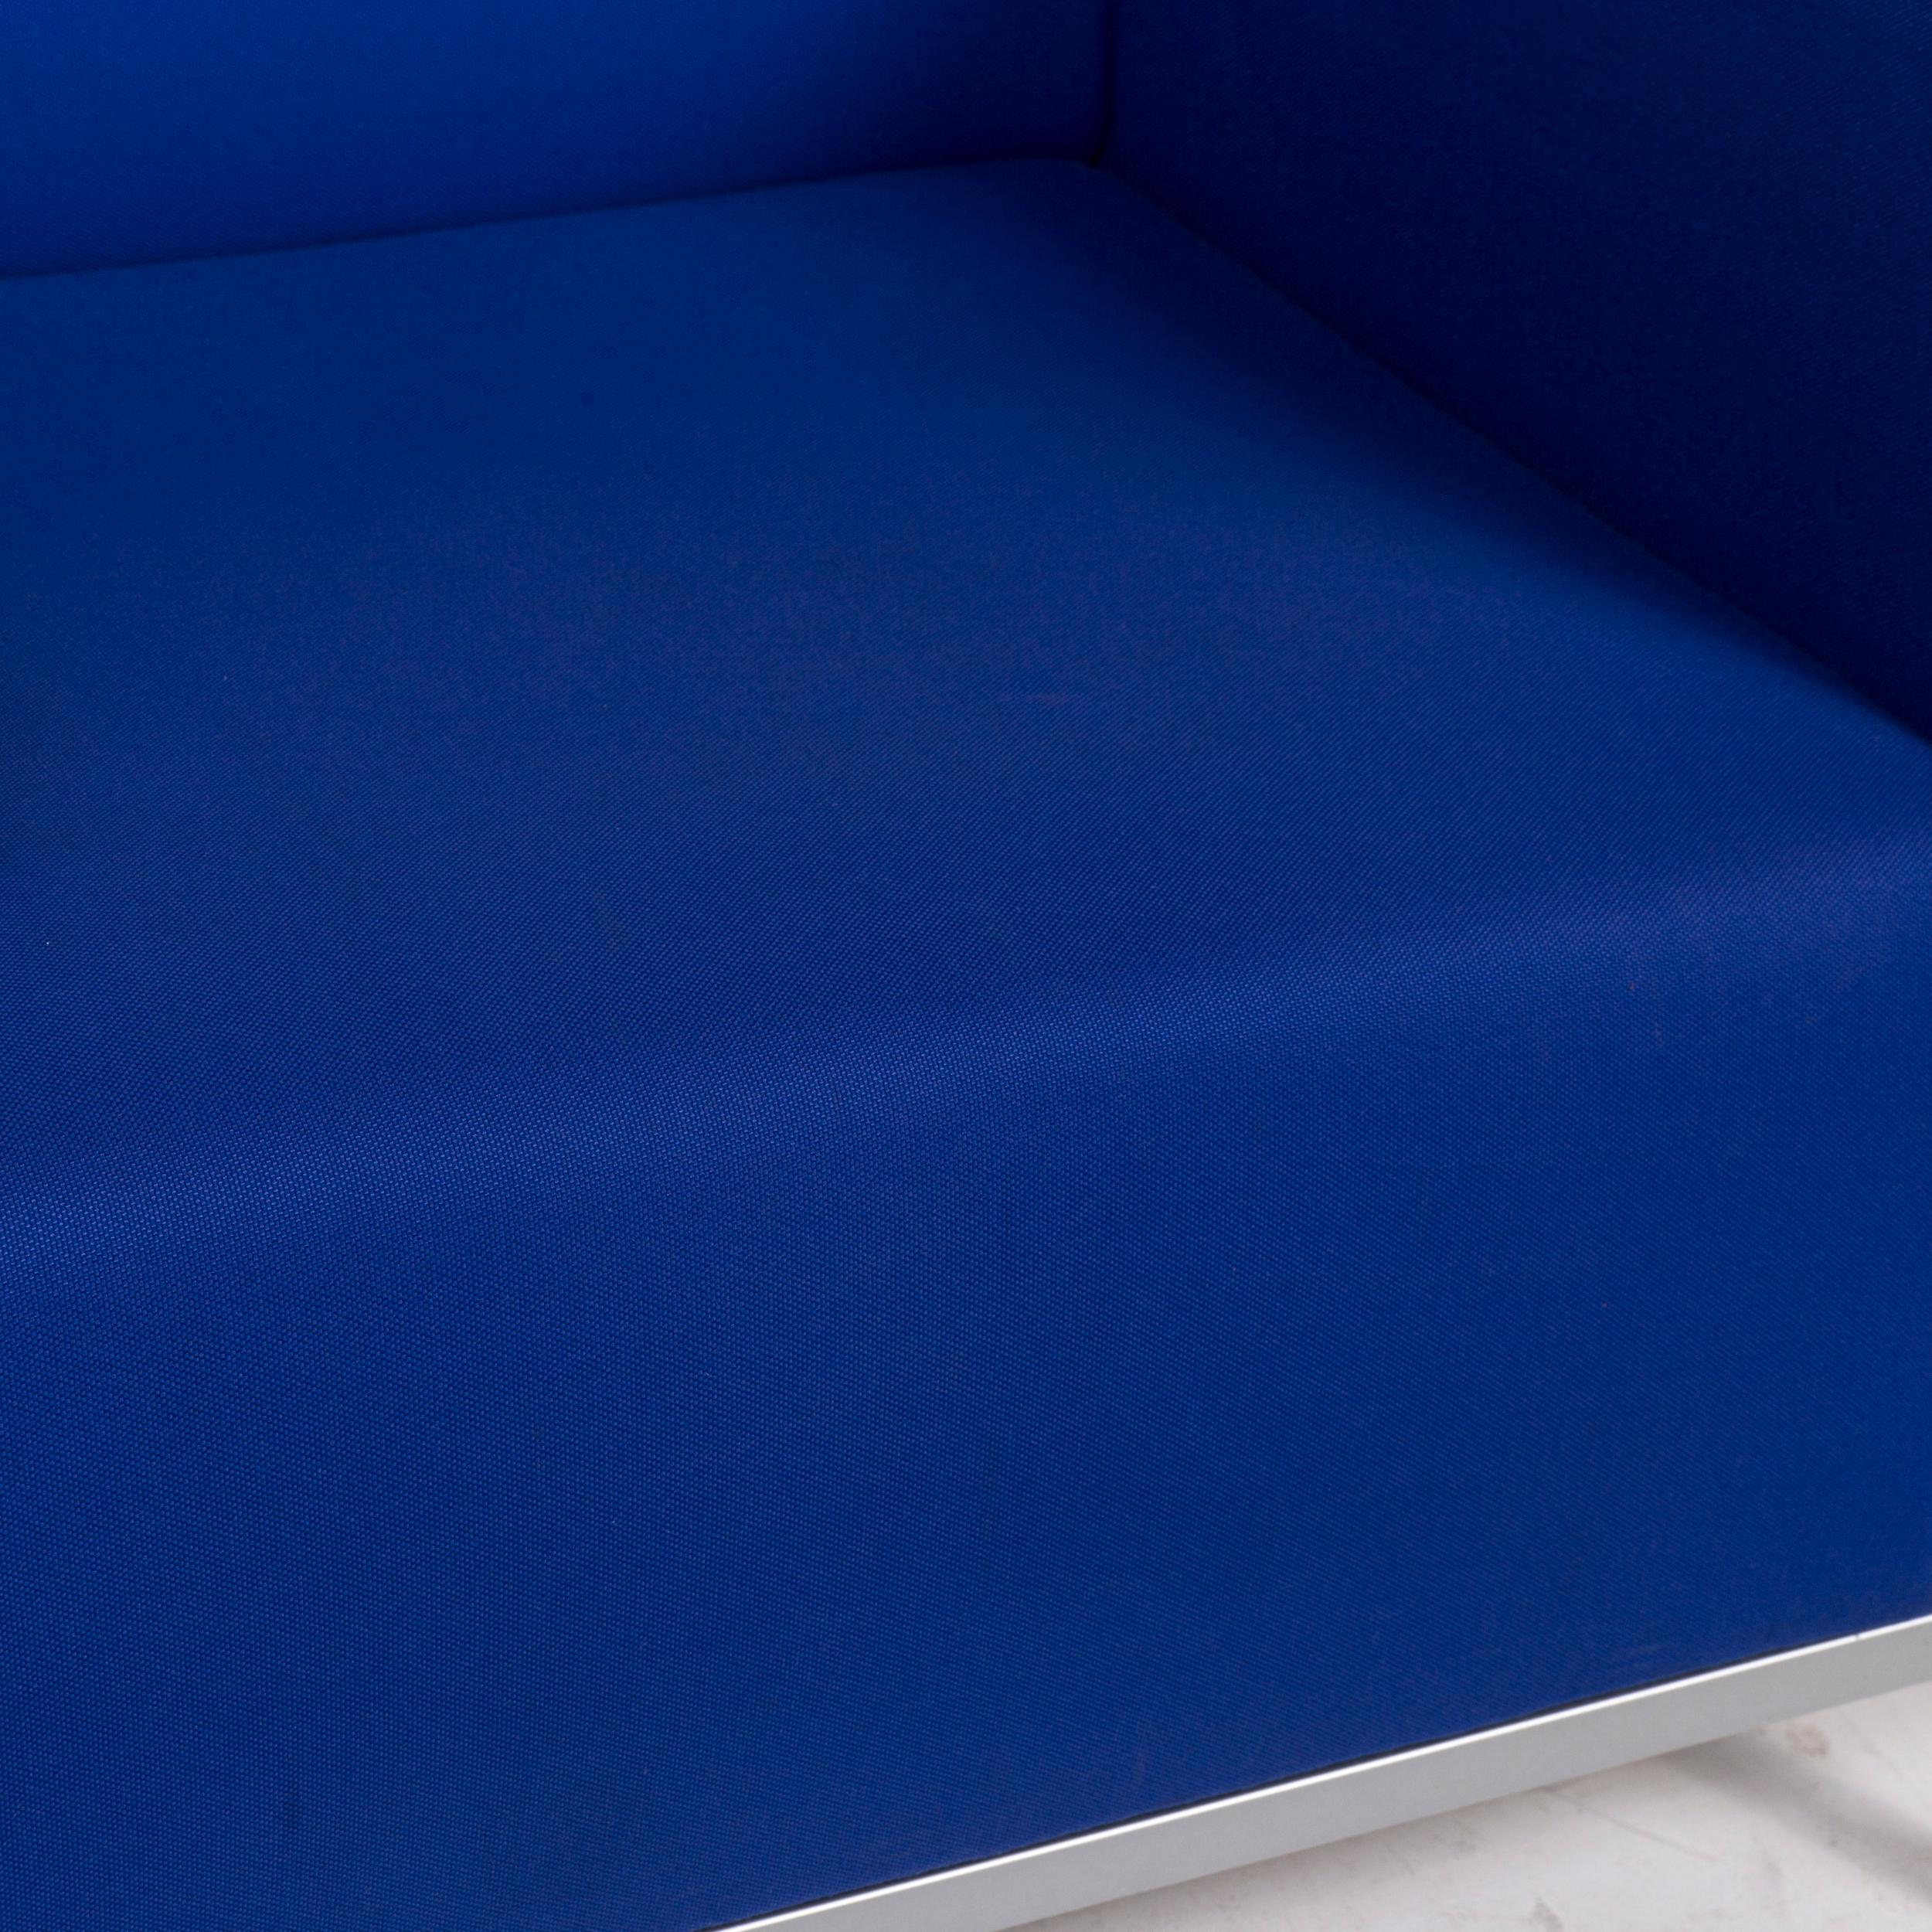 We bring to you a MDF Italia fabric armchair blue.
   
 

 Product measurements in centimeters:
 

Depth 78
Width 78
Height 69
Seat-height 41
Rest-height 60
Seat-depth 54
Seat-width 60
Back-height 28.